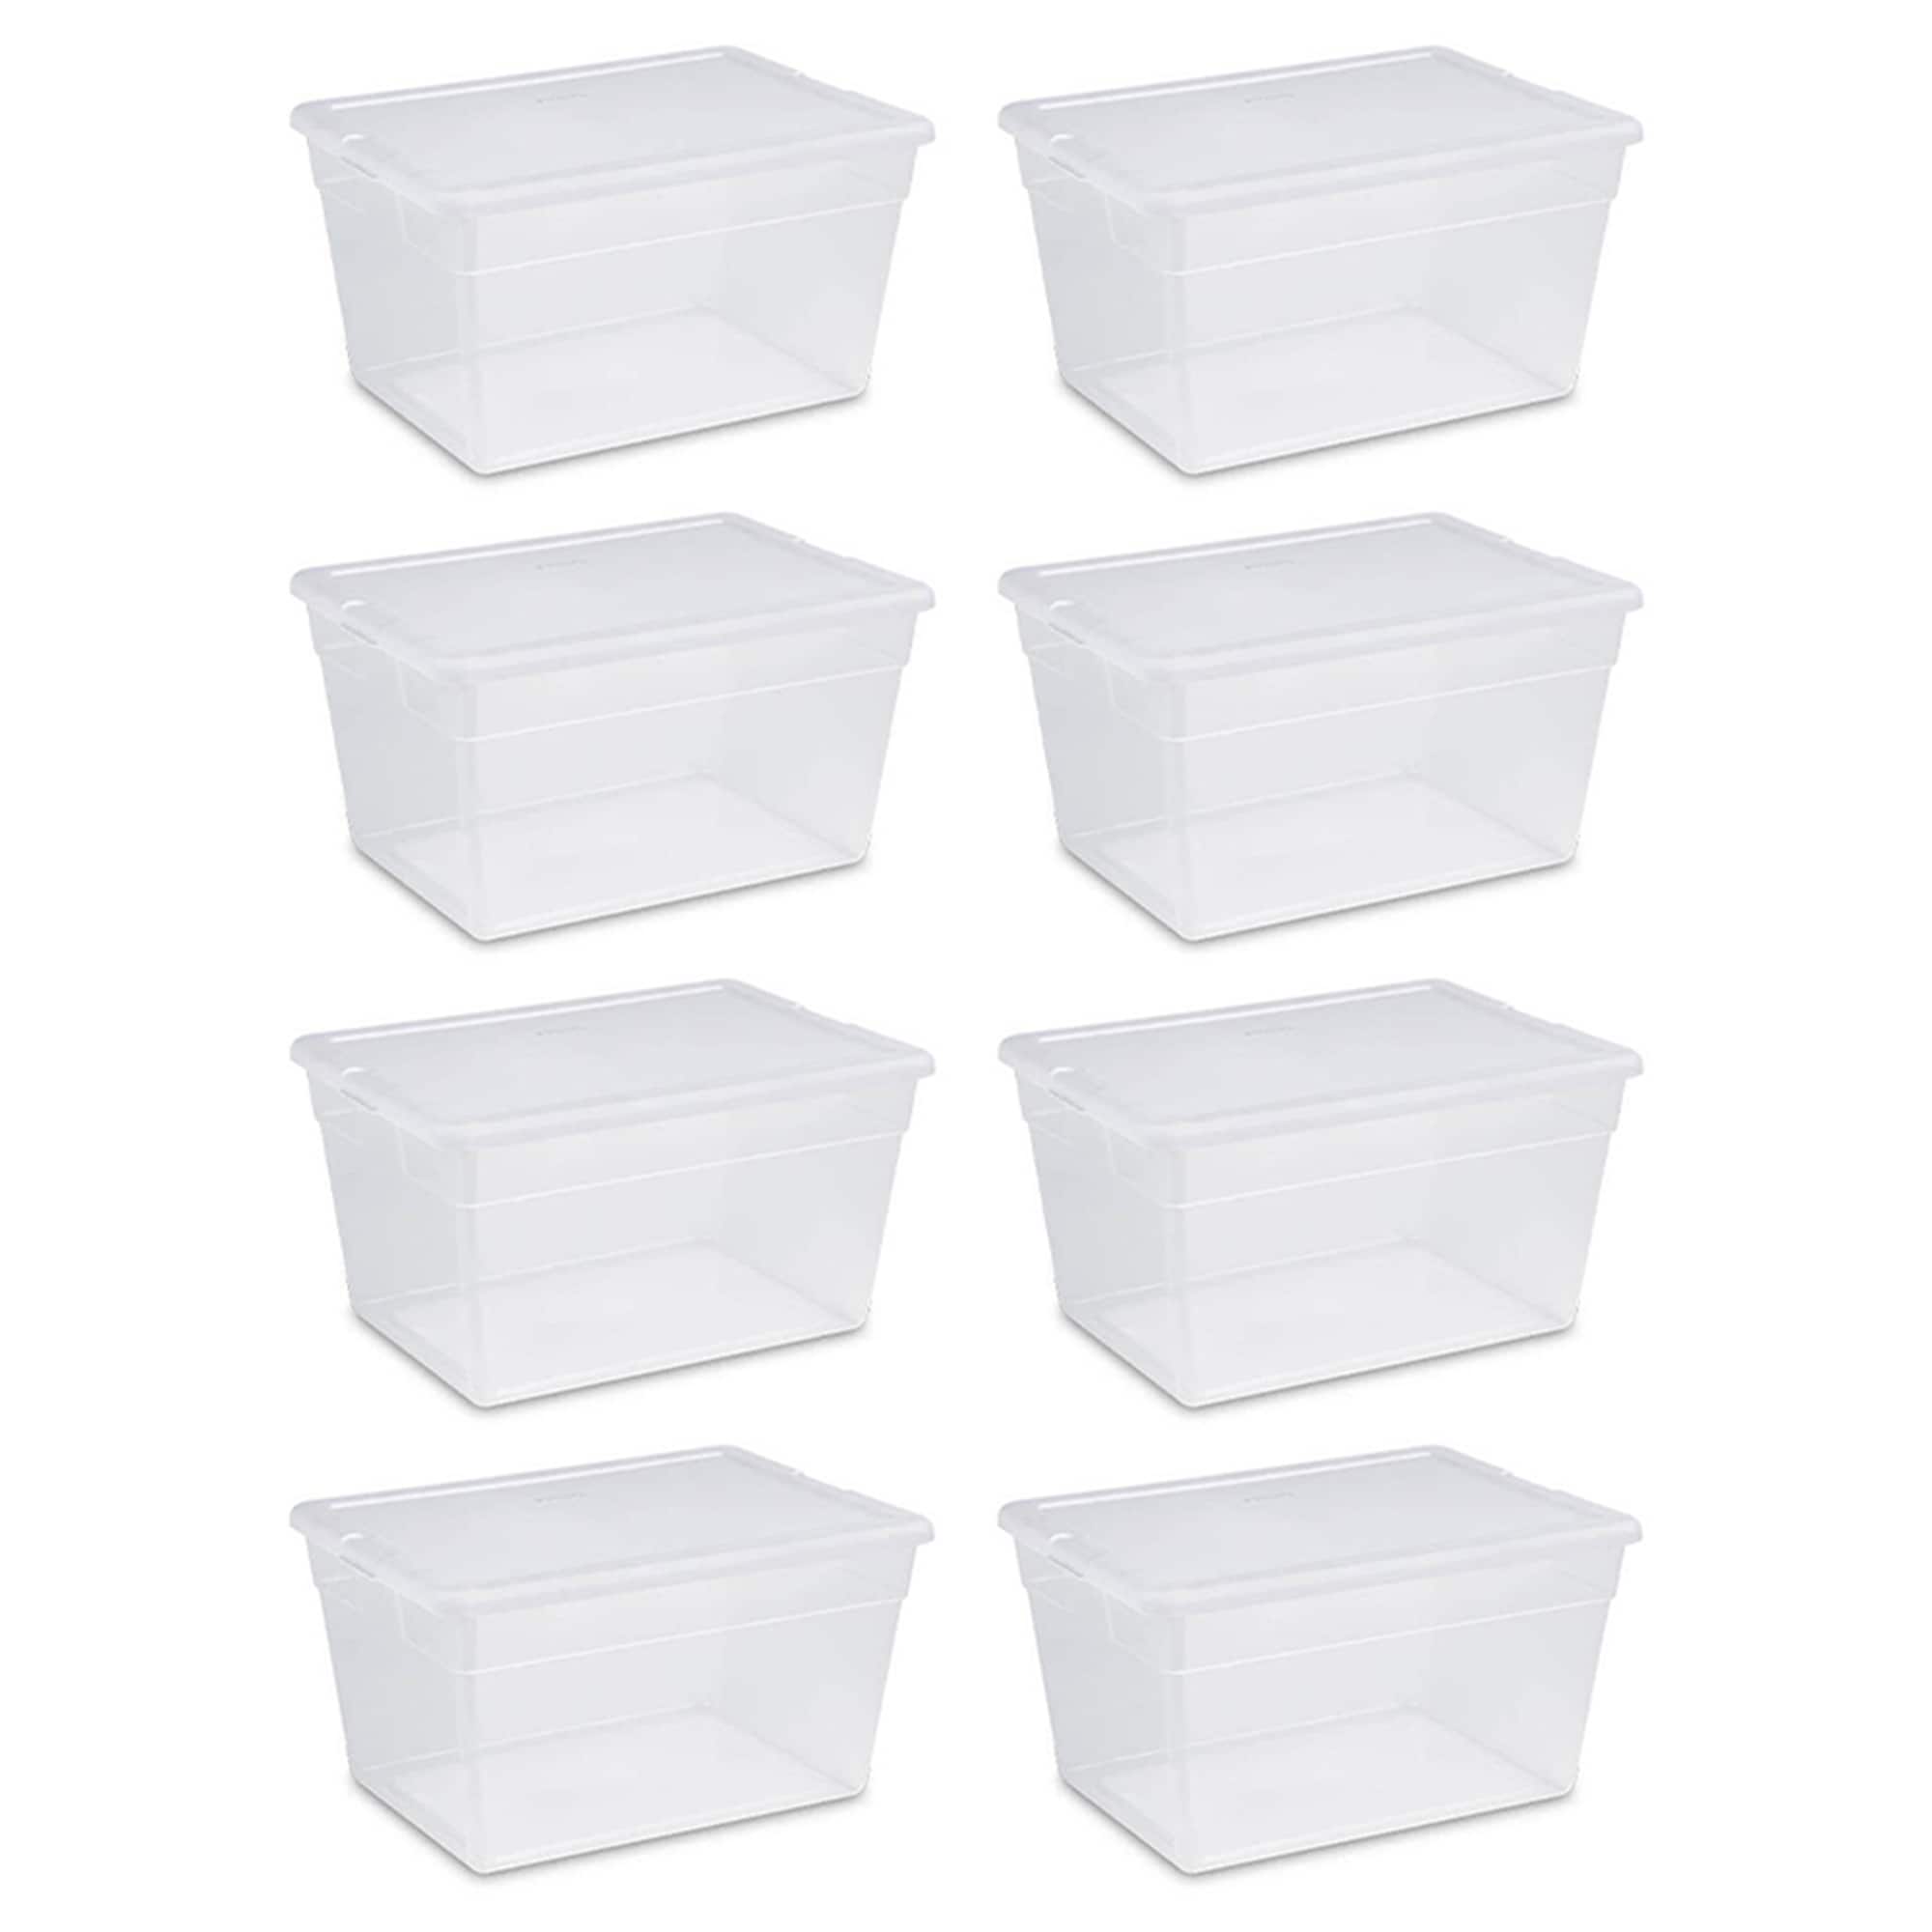 Sterilite 16 Quart Plastic Stacker Box, Lidded Storage Bin Container for  Home and Garage Organizing, Shoes, Tools, Clear Base & Gray Lid, 12-Pack